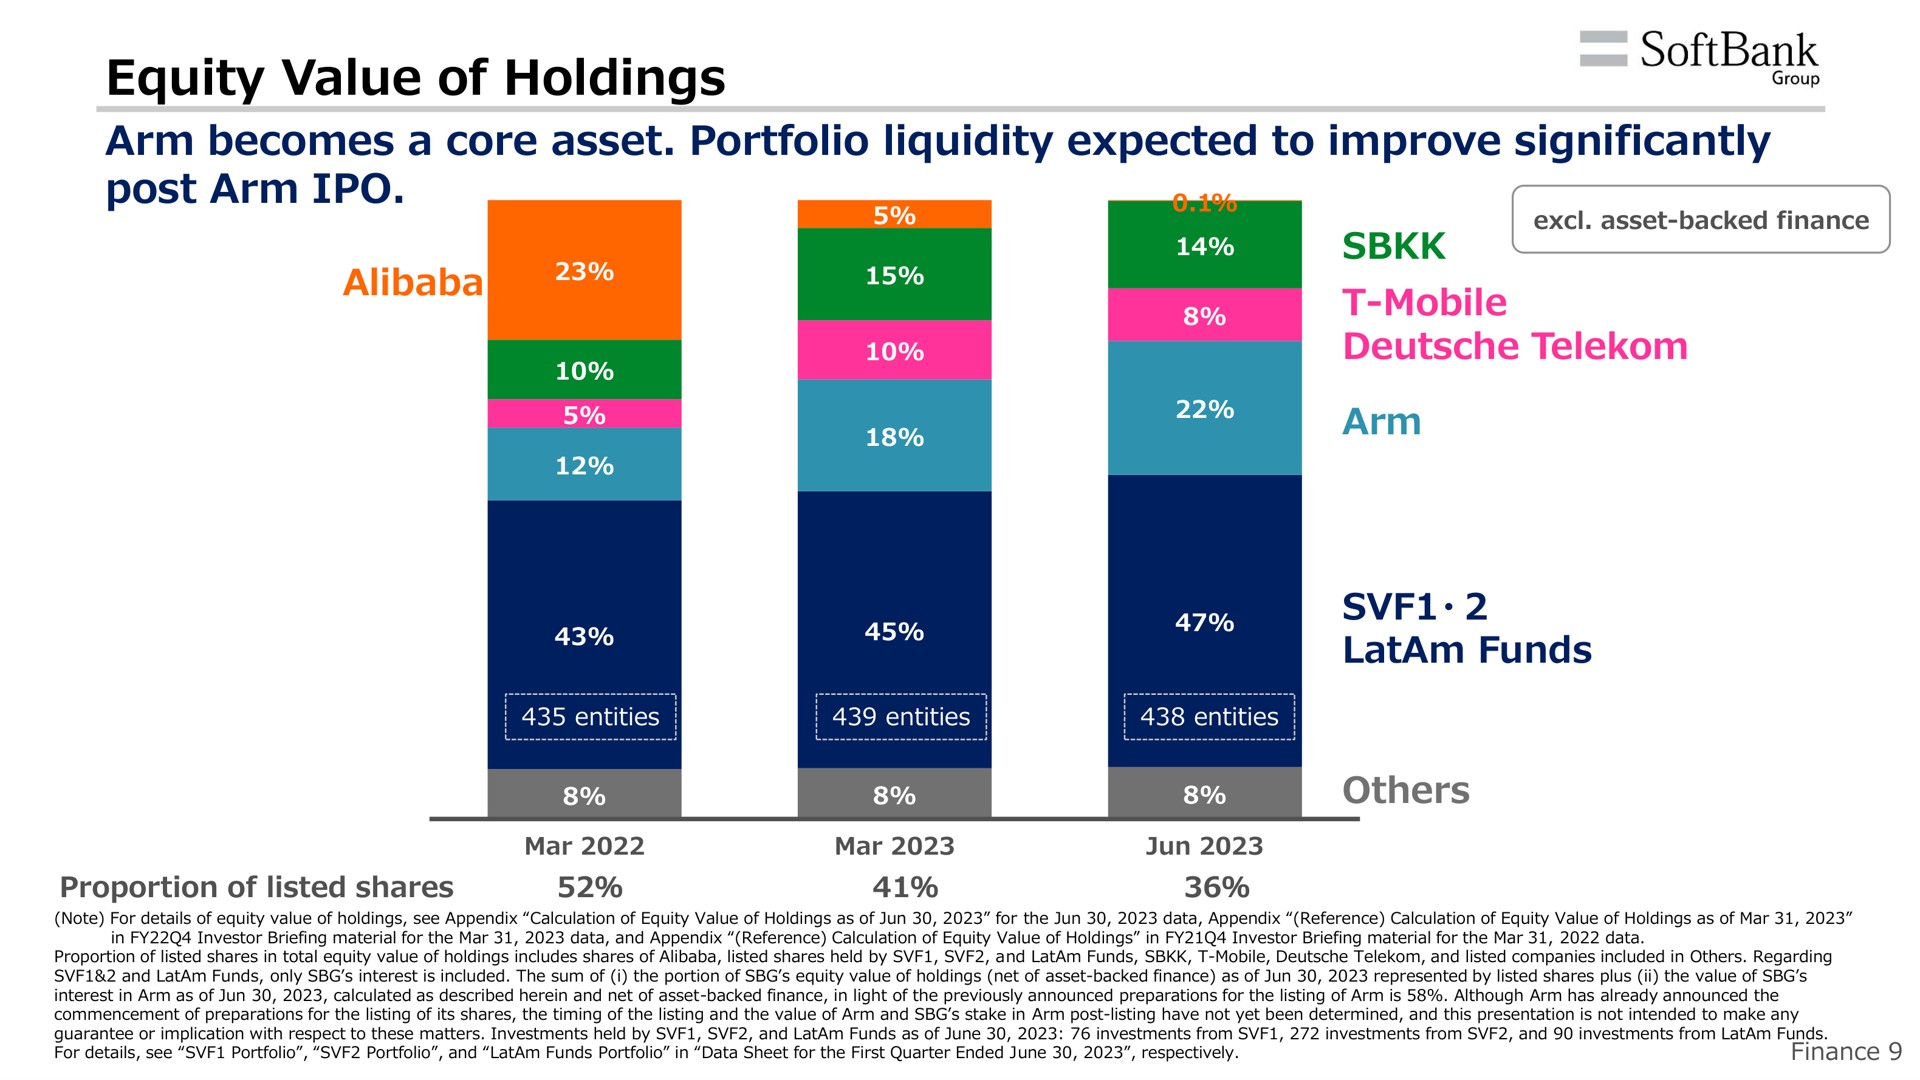 equity value of holdings | SoftBank